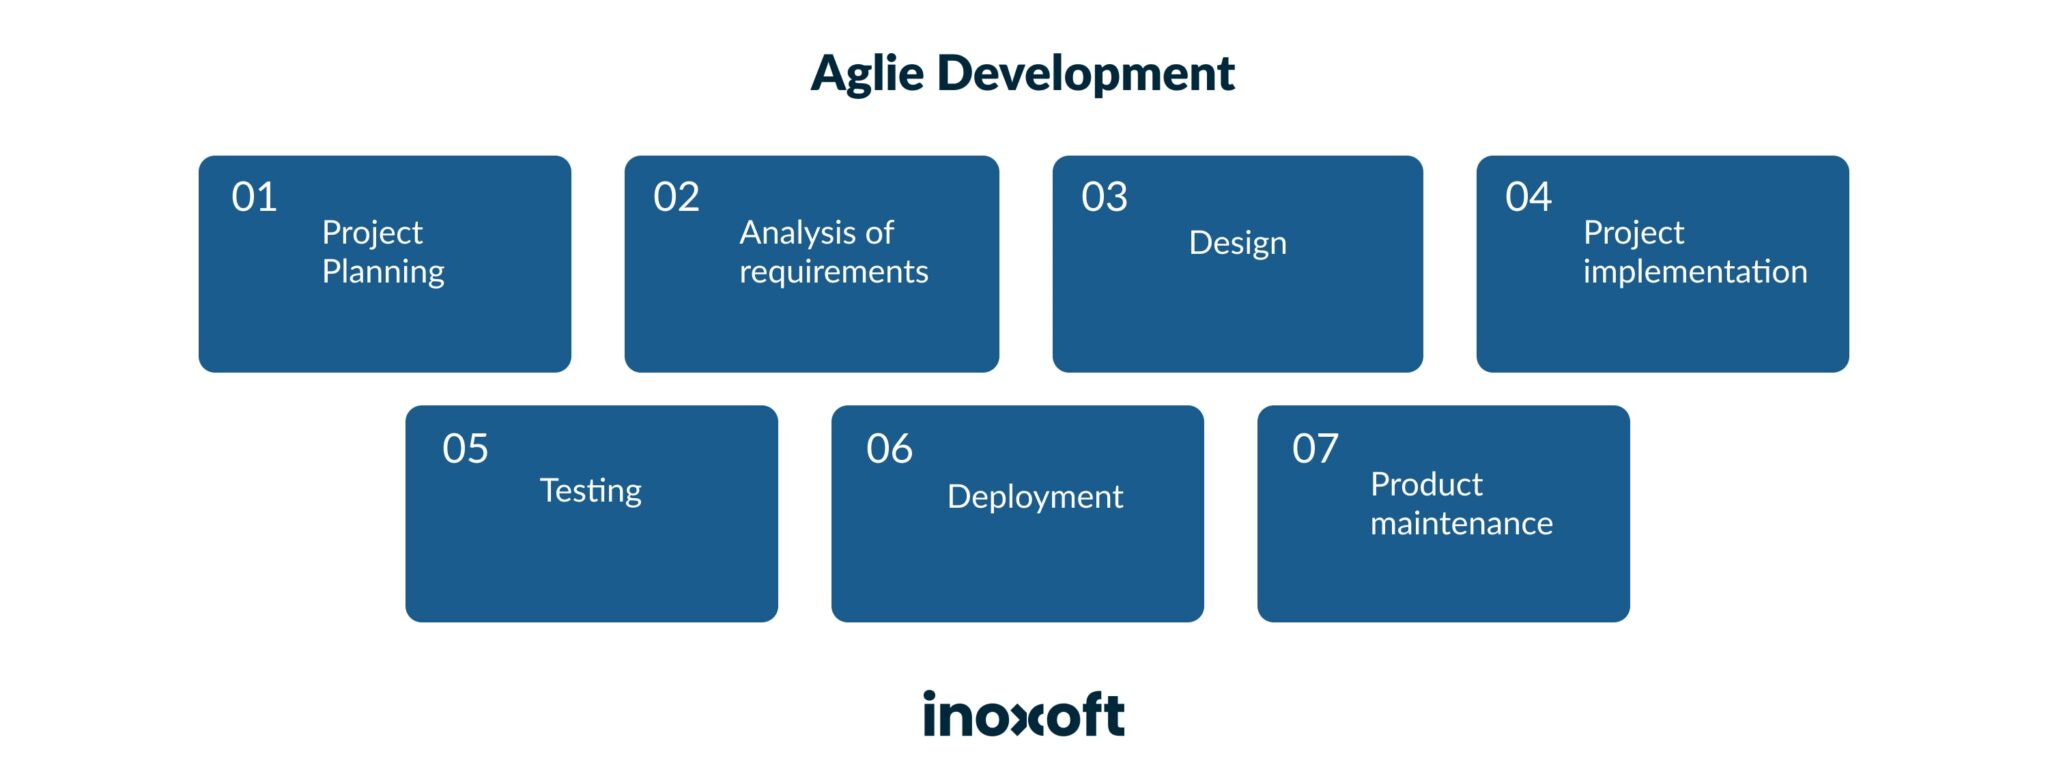 7 (Seven) phases of Agile Software Development Lifecycle